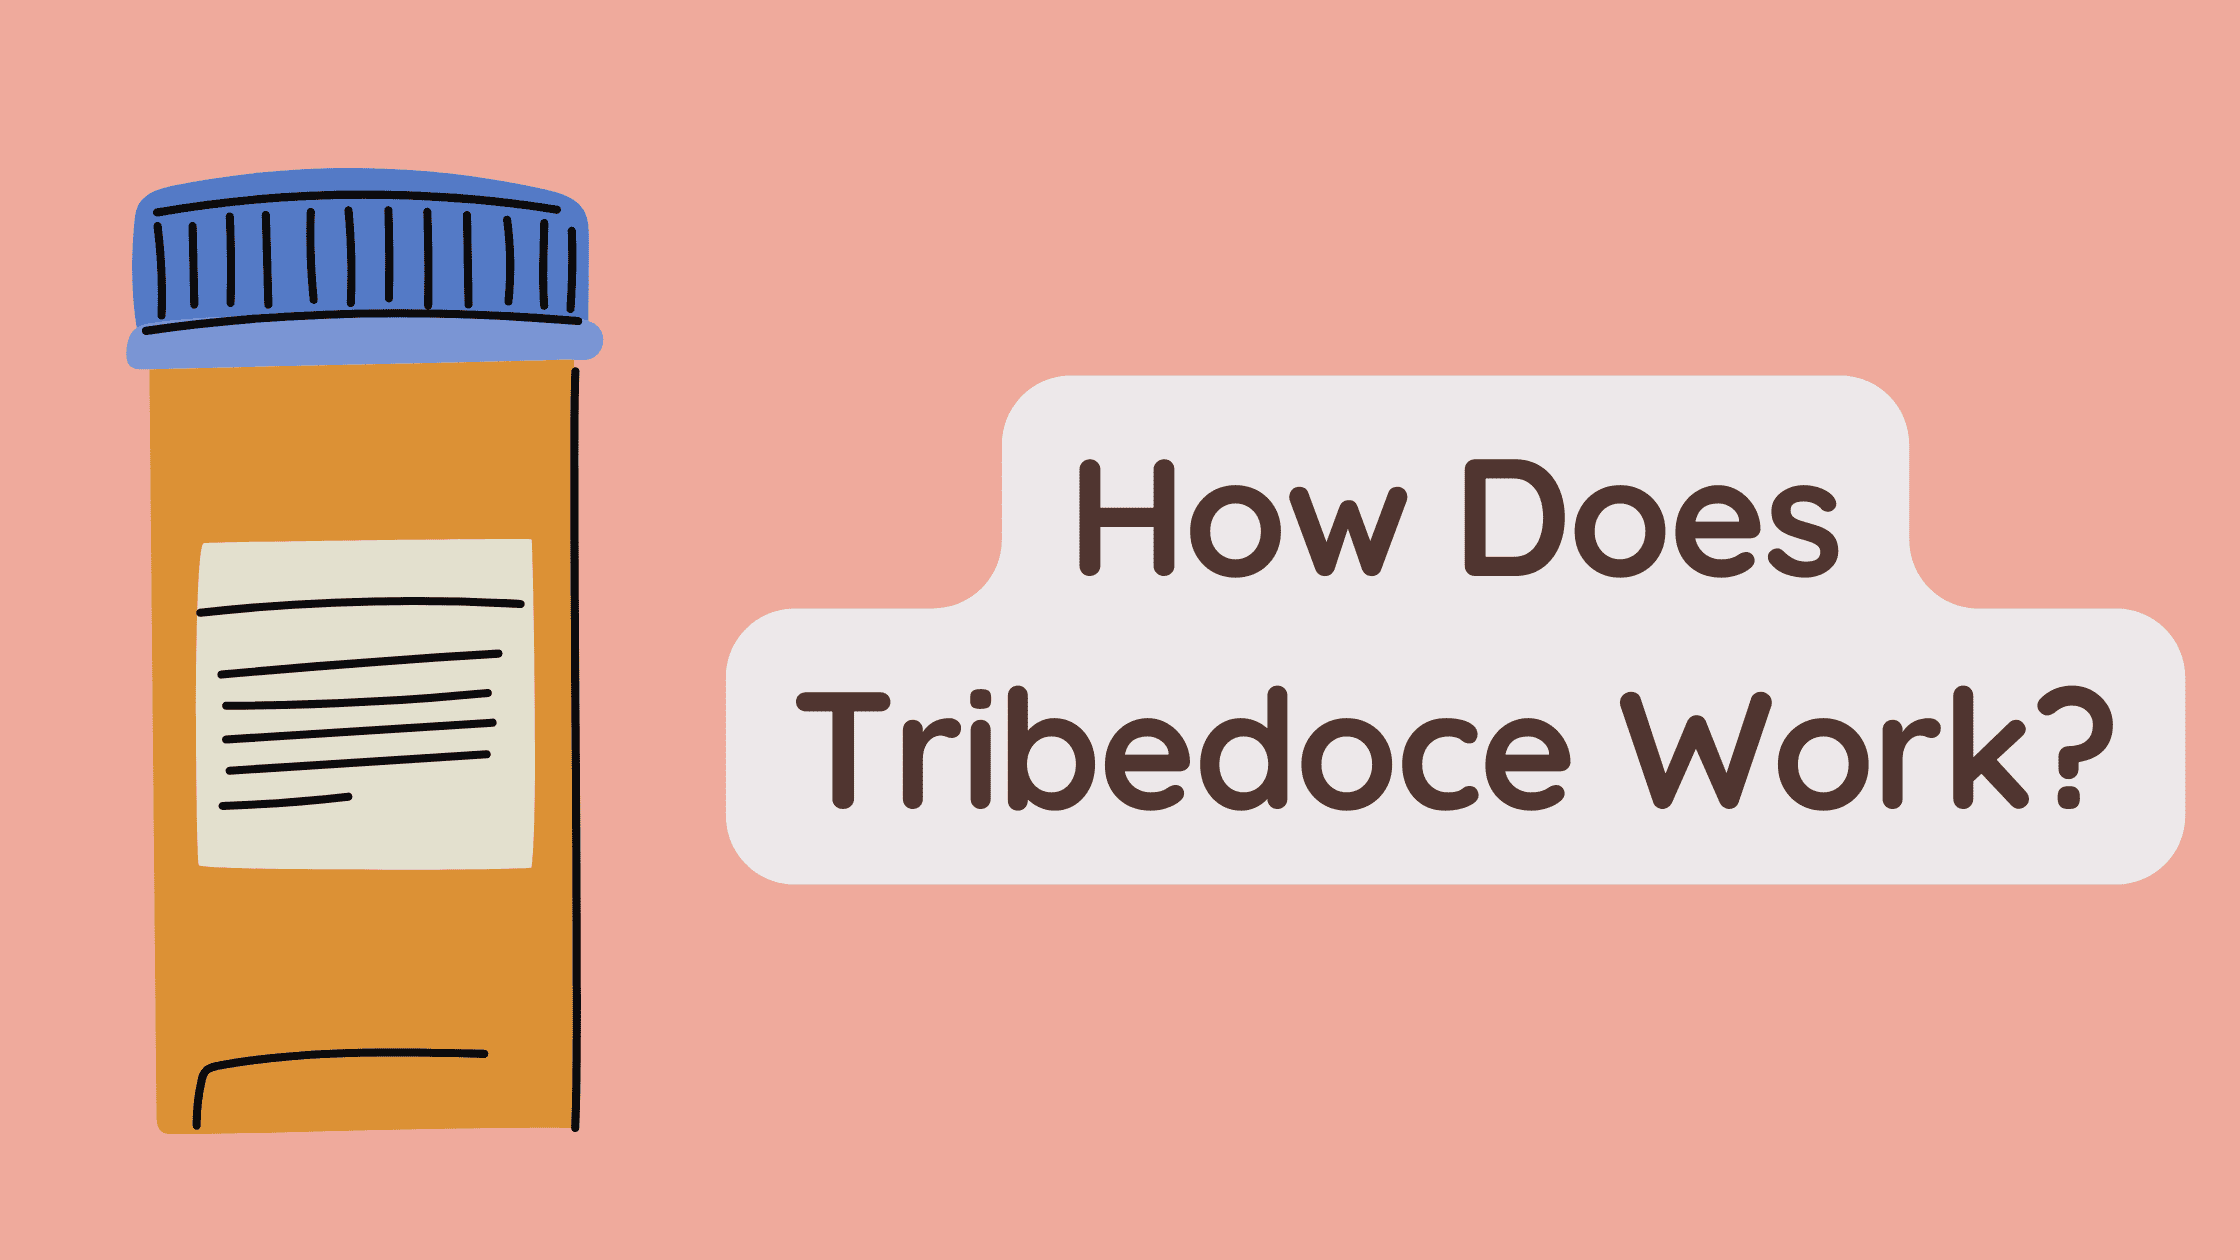 How Does Tribedoce Work?